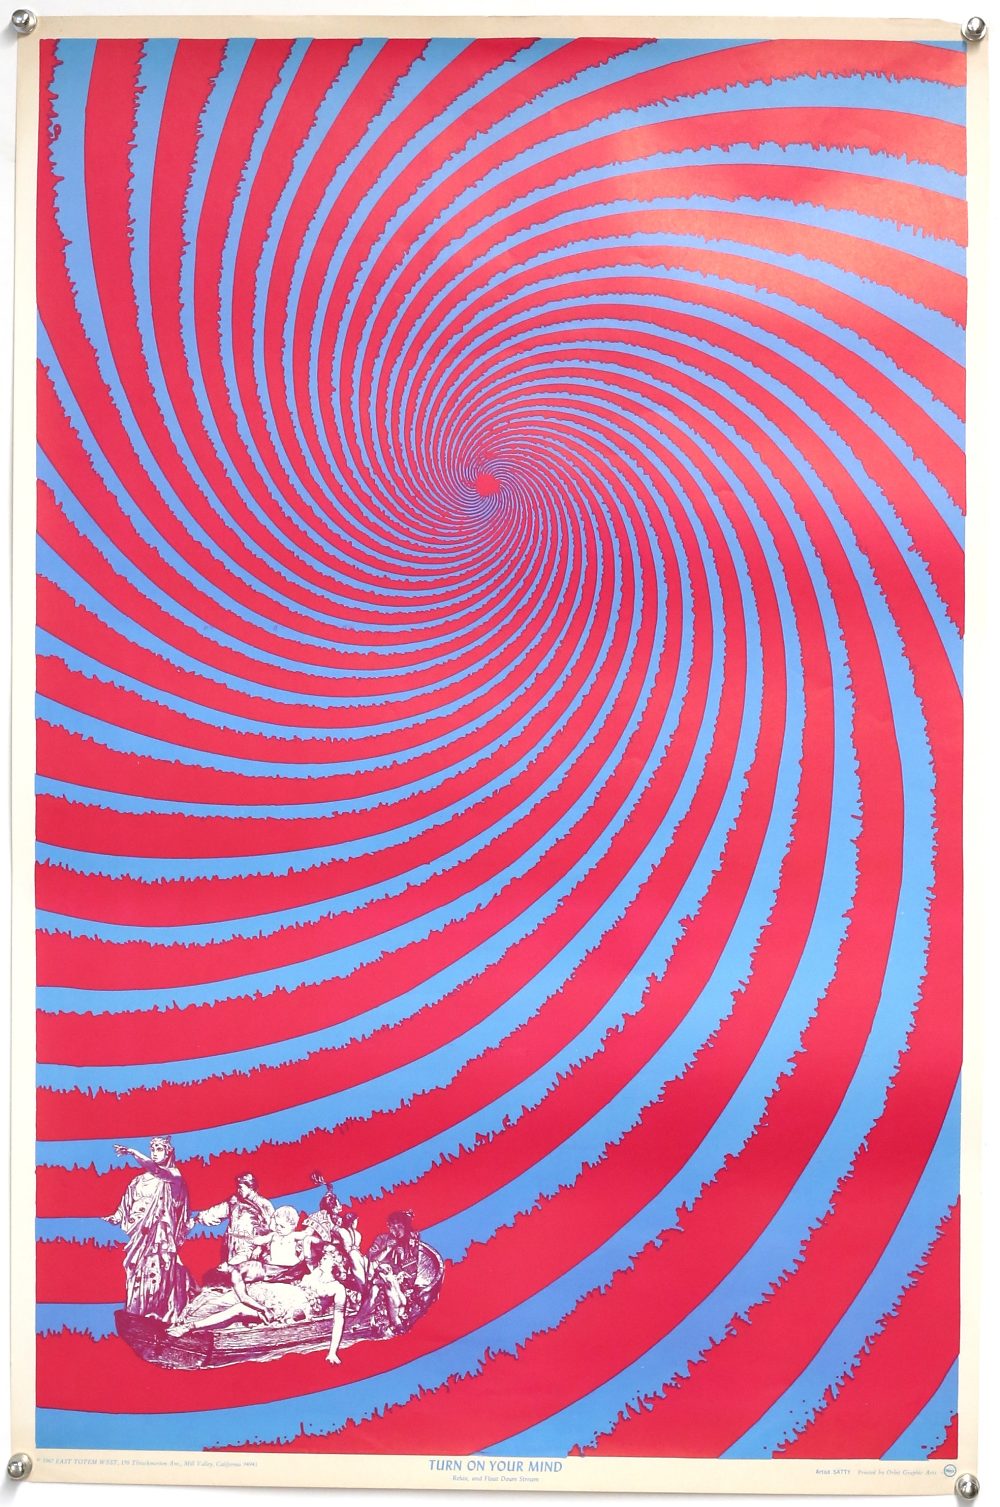 Turn On Your Mind US Beatles psychedelic counter-culture poster with Satty artwork and printed by